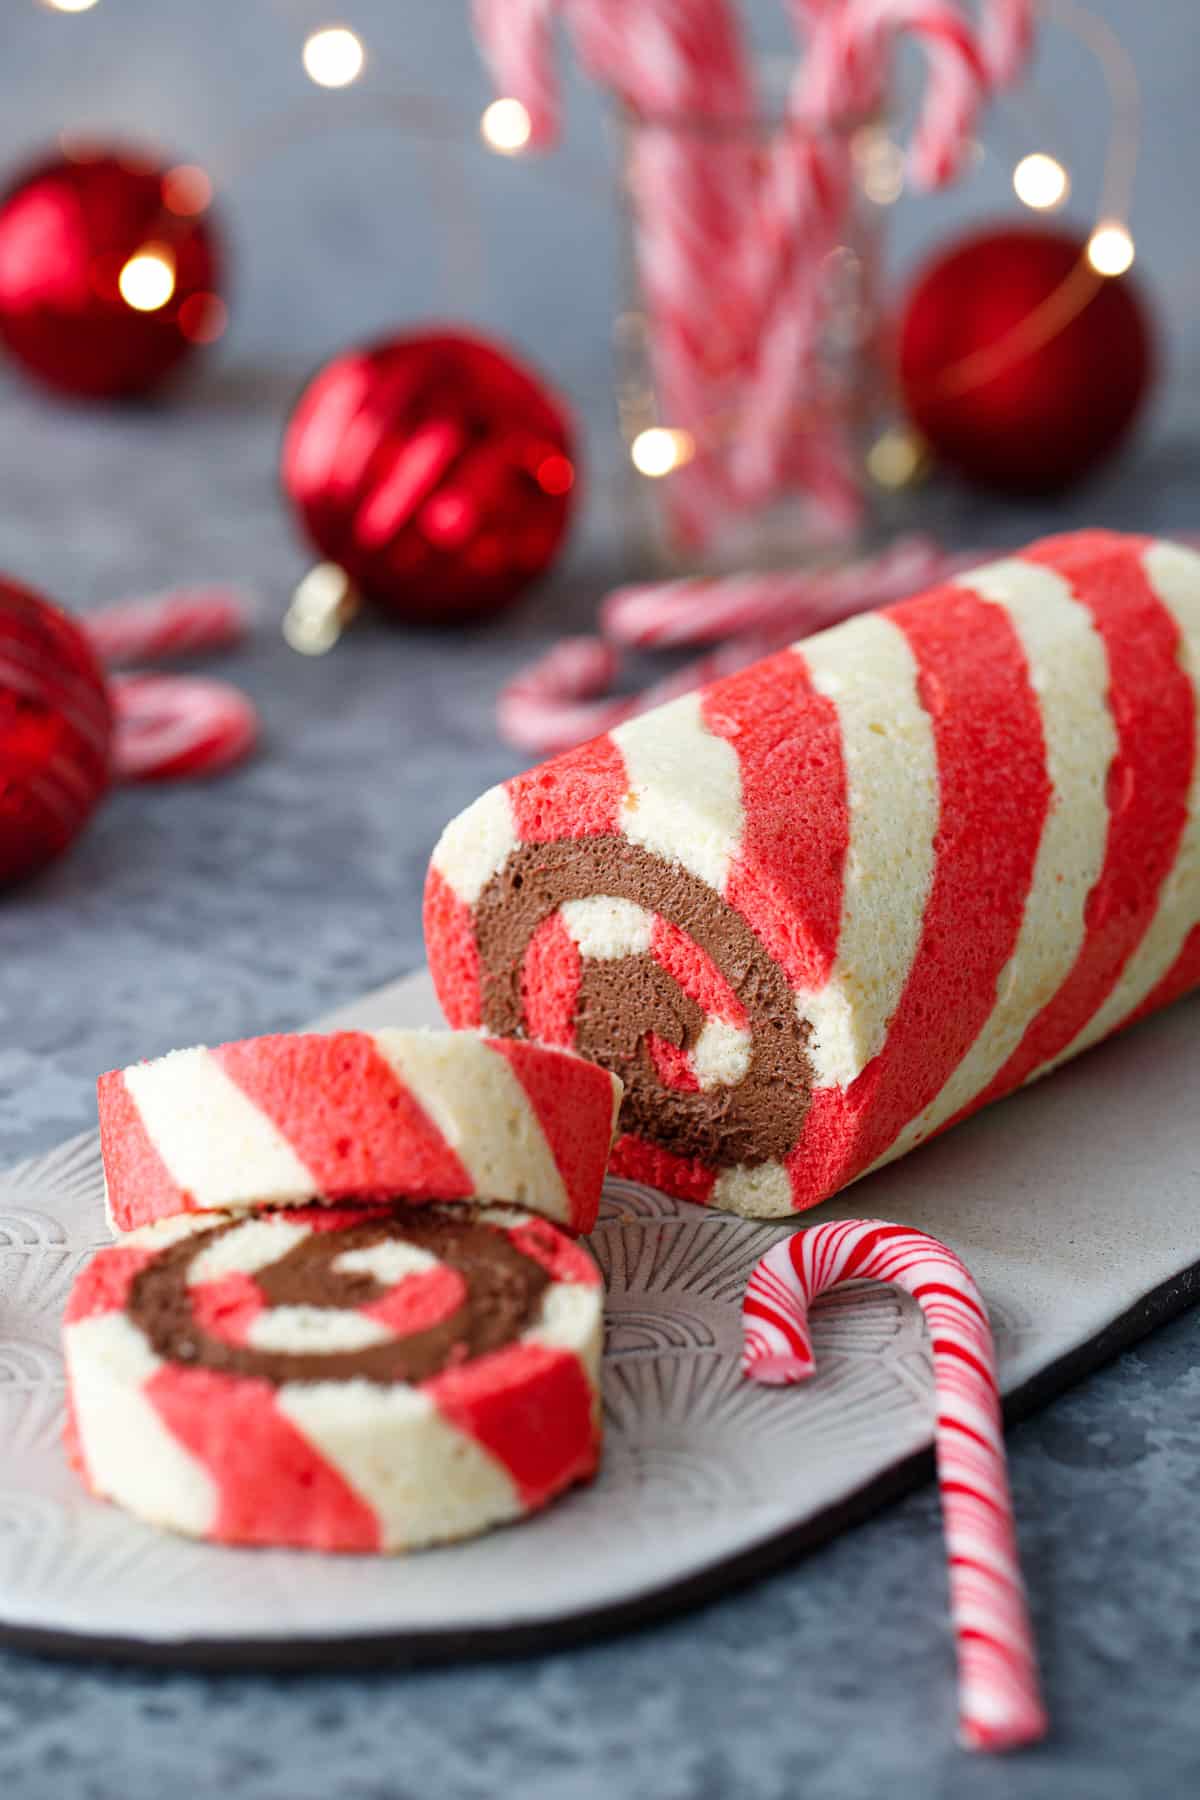 Red and white Peppermint cake roll with two slices cut off and laying down to show a perfect spiral of chocolate peppermint whipped cream filling, with candy canes, ornaments, and Christmas lights out of focus in the background.